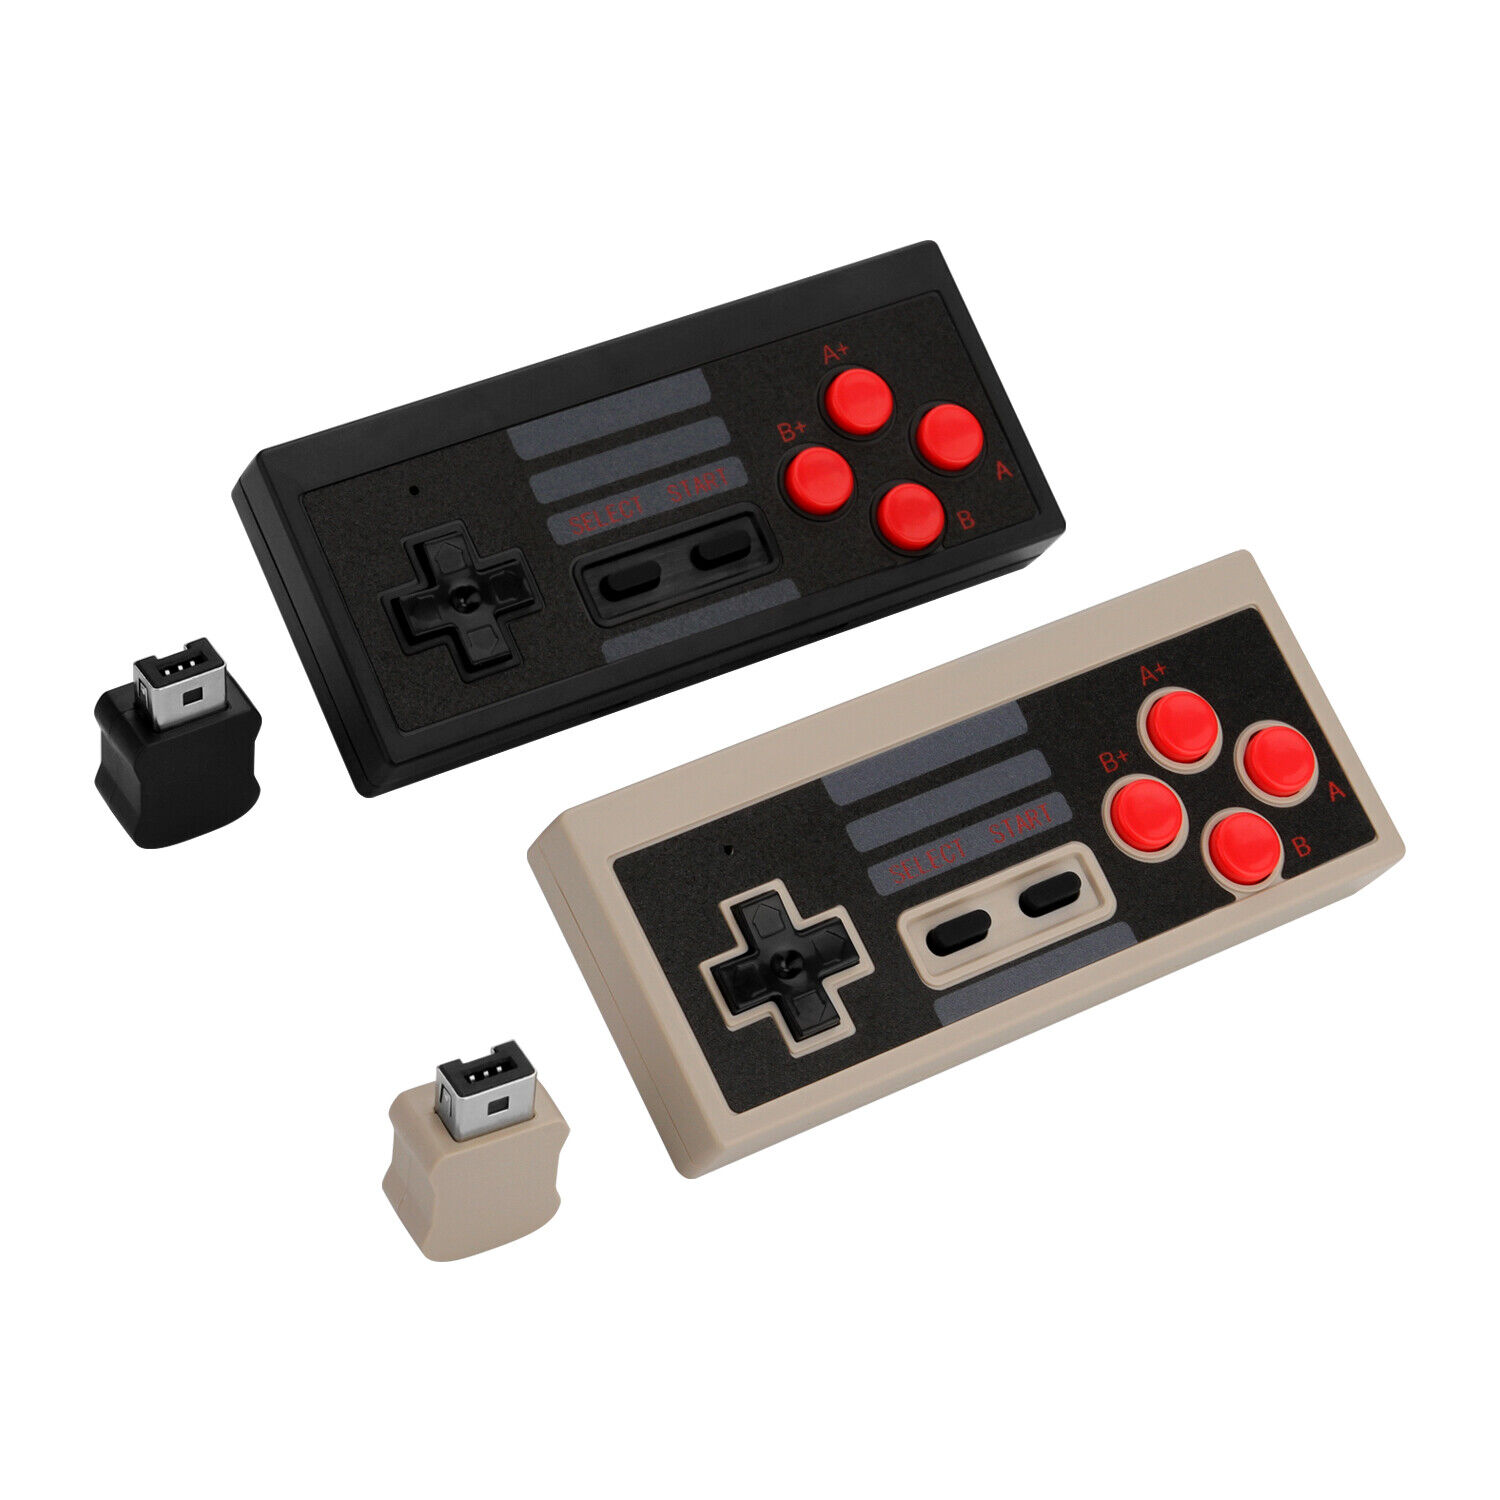 2x 2.4G Wireless Joypad Game Controller for NES Mini Classic Edition Game System